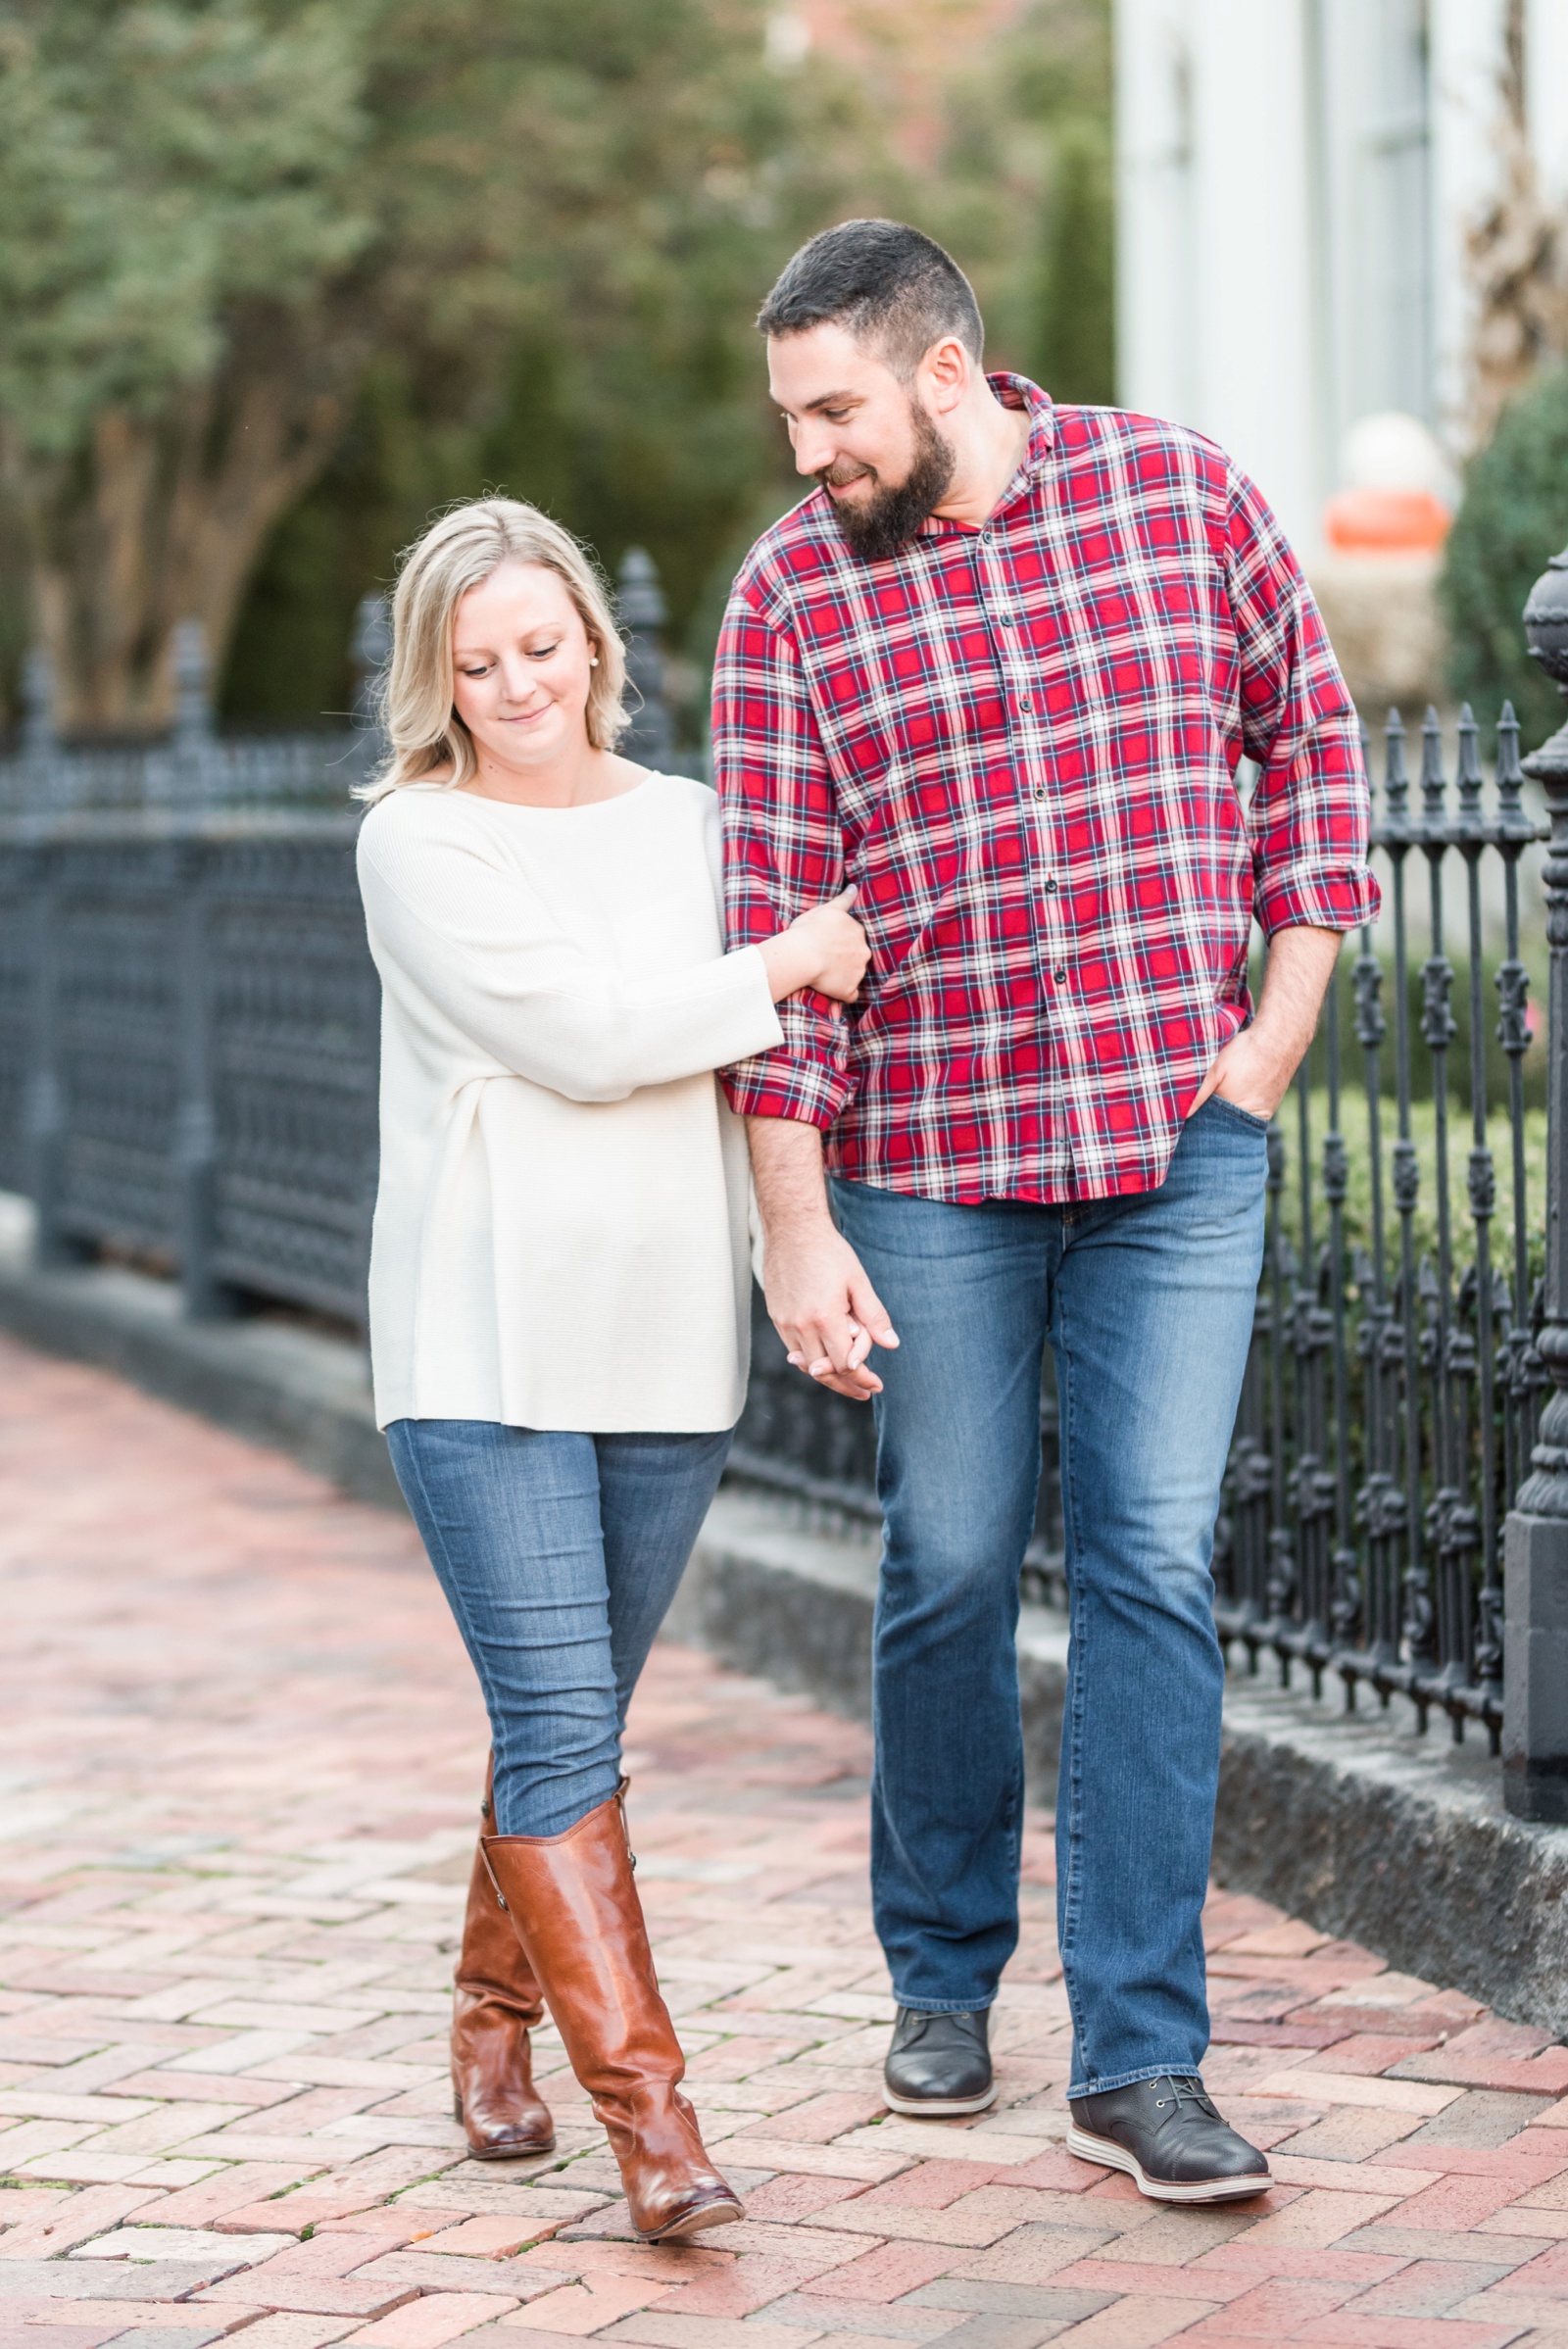 downtown-norfolk-virginia-fall-engagement-session-photo_2311.jpg